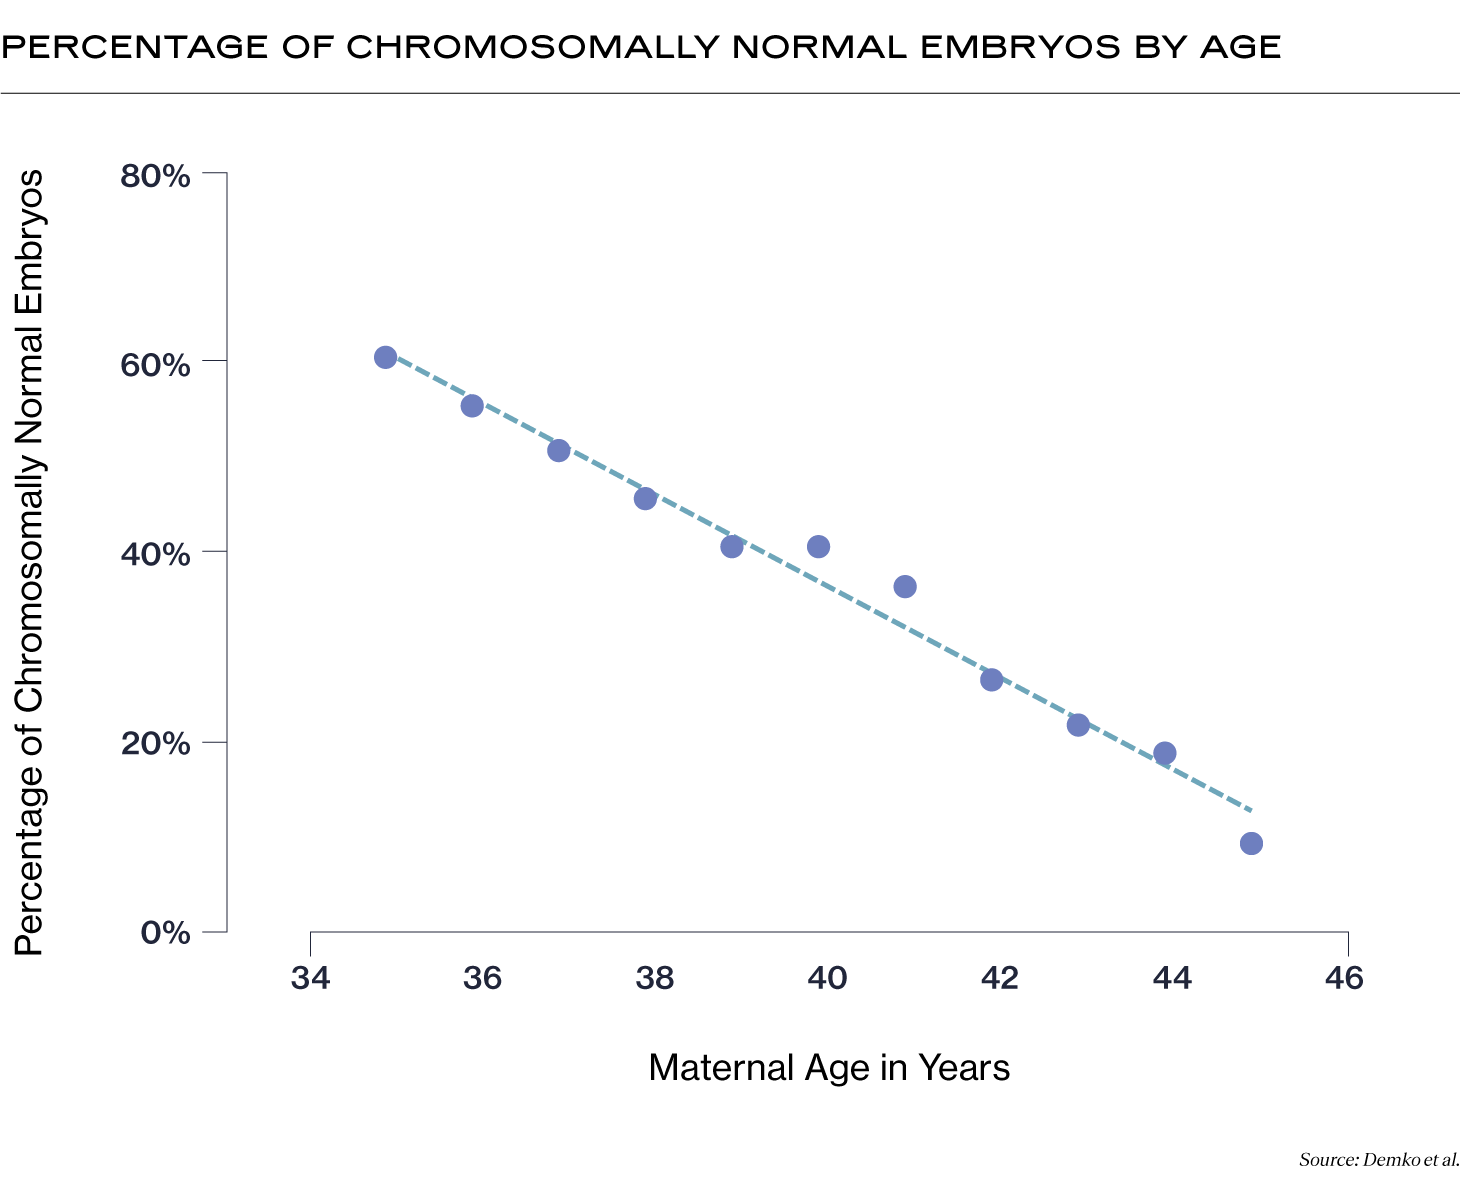 Percentage of Chromosomally Normal Embryos by Age